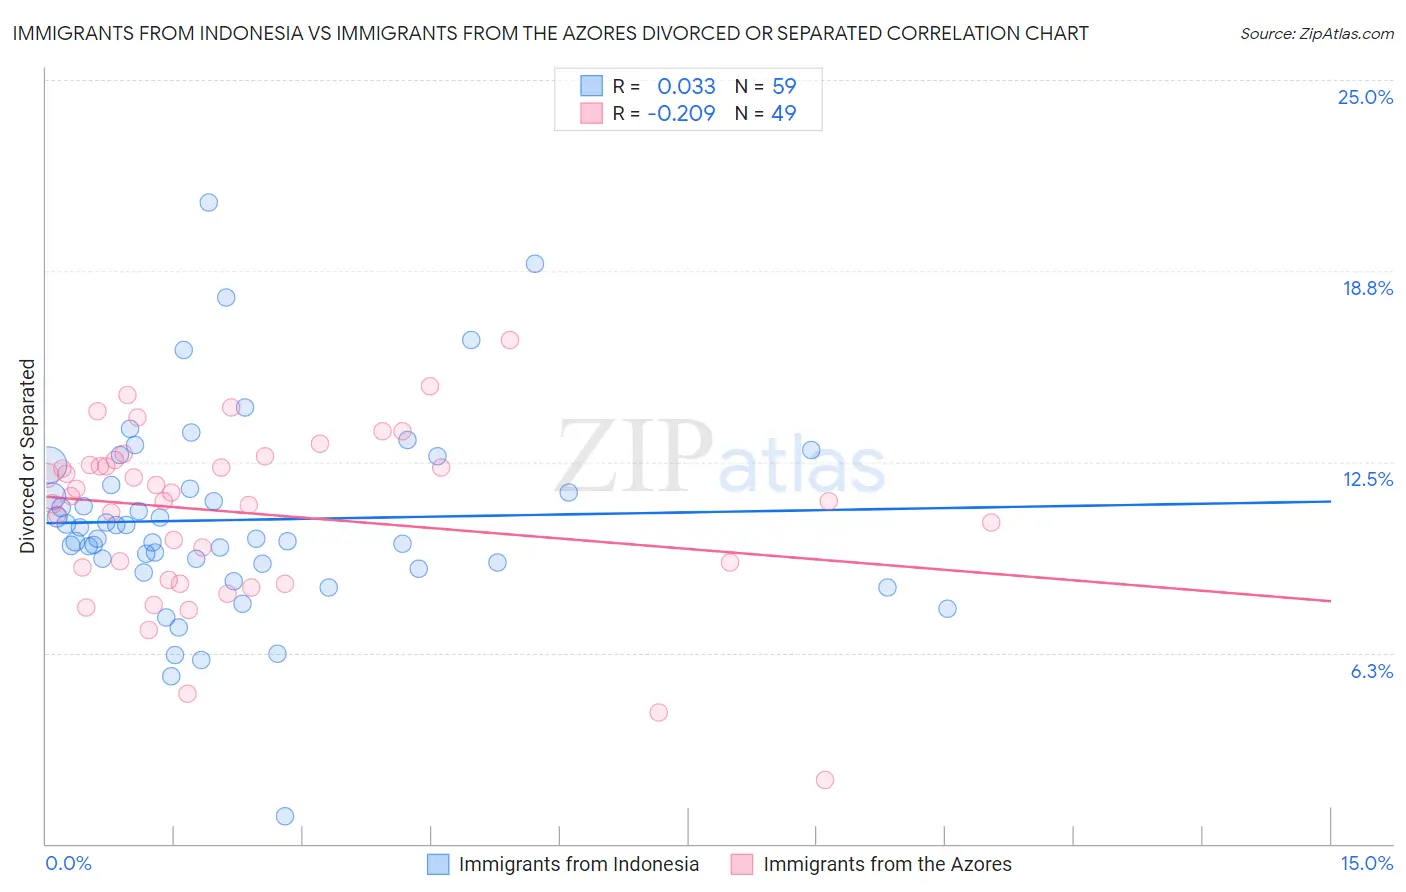 Immigrants from Indonesia vs Immigrants from the Azores Divorced or Separated